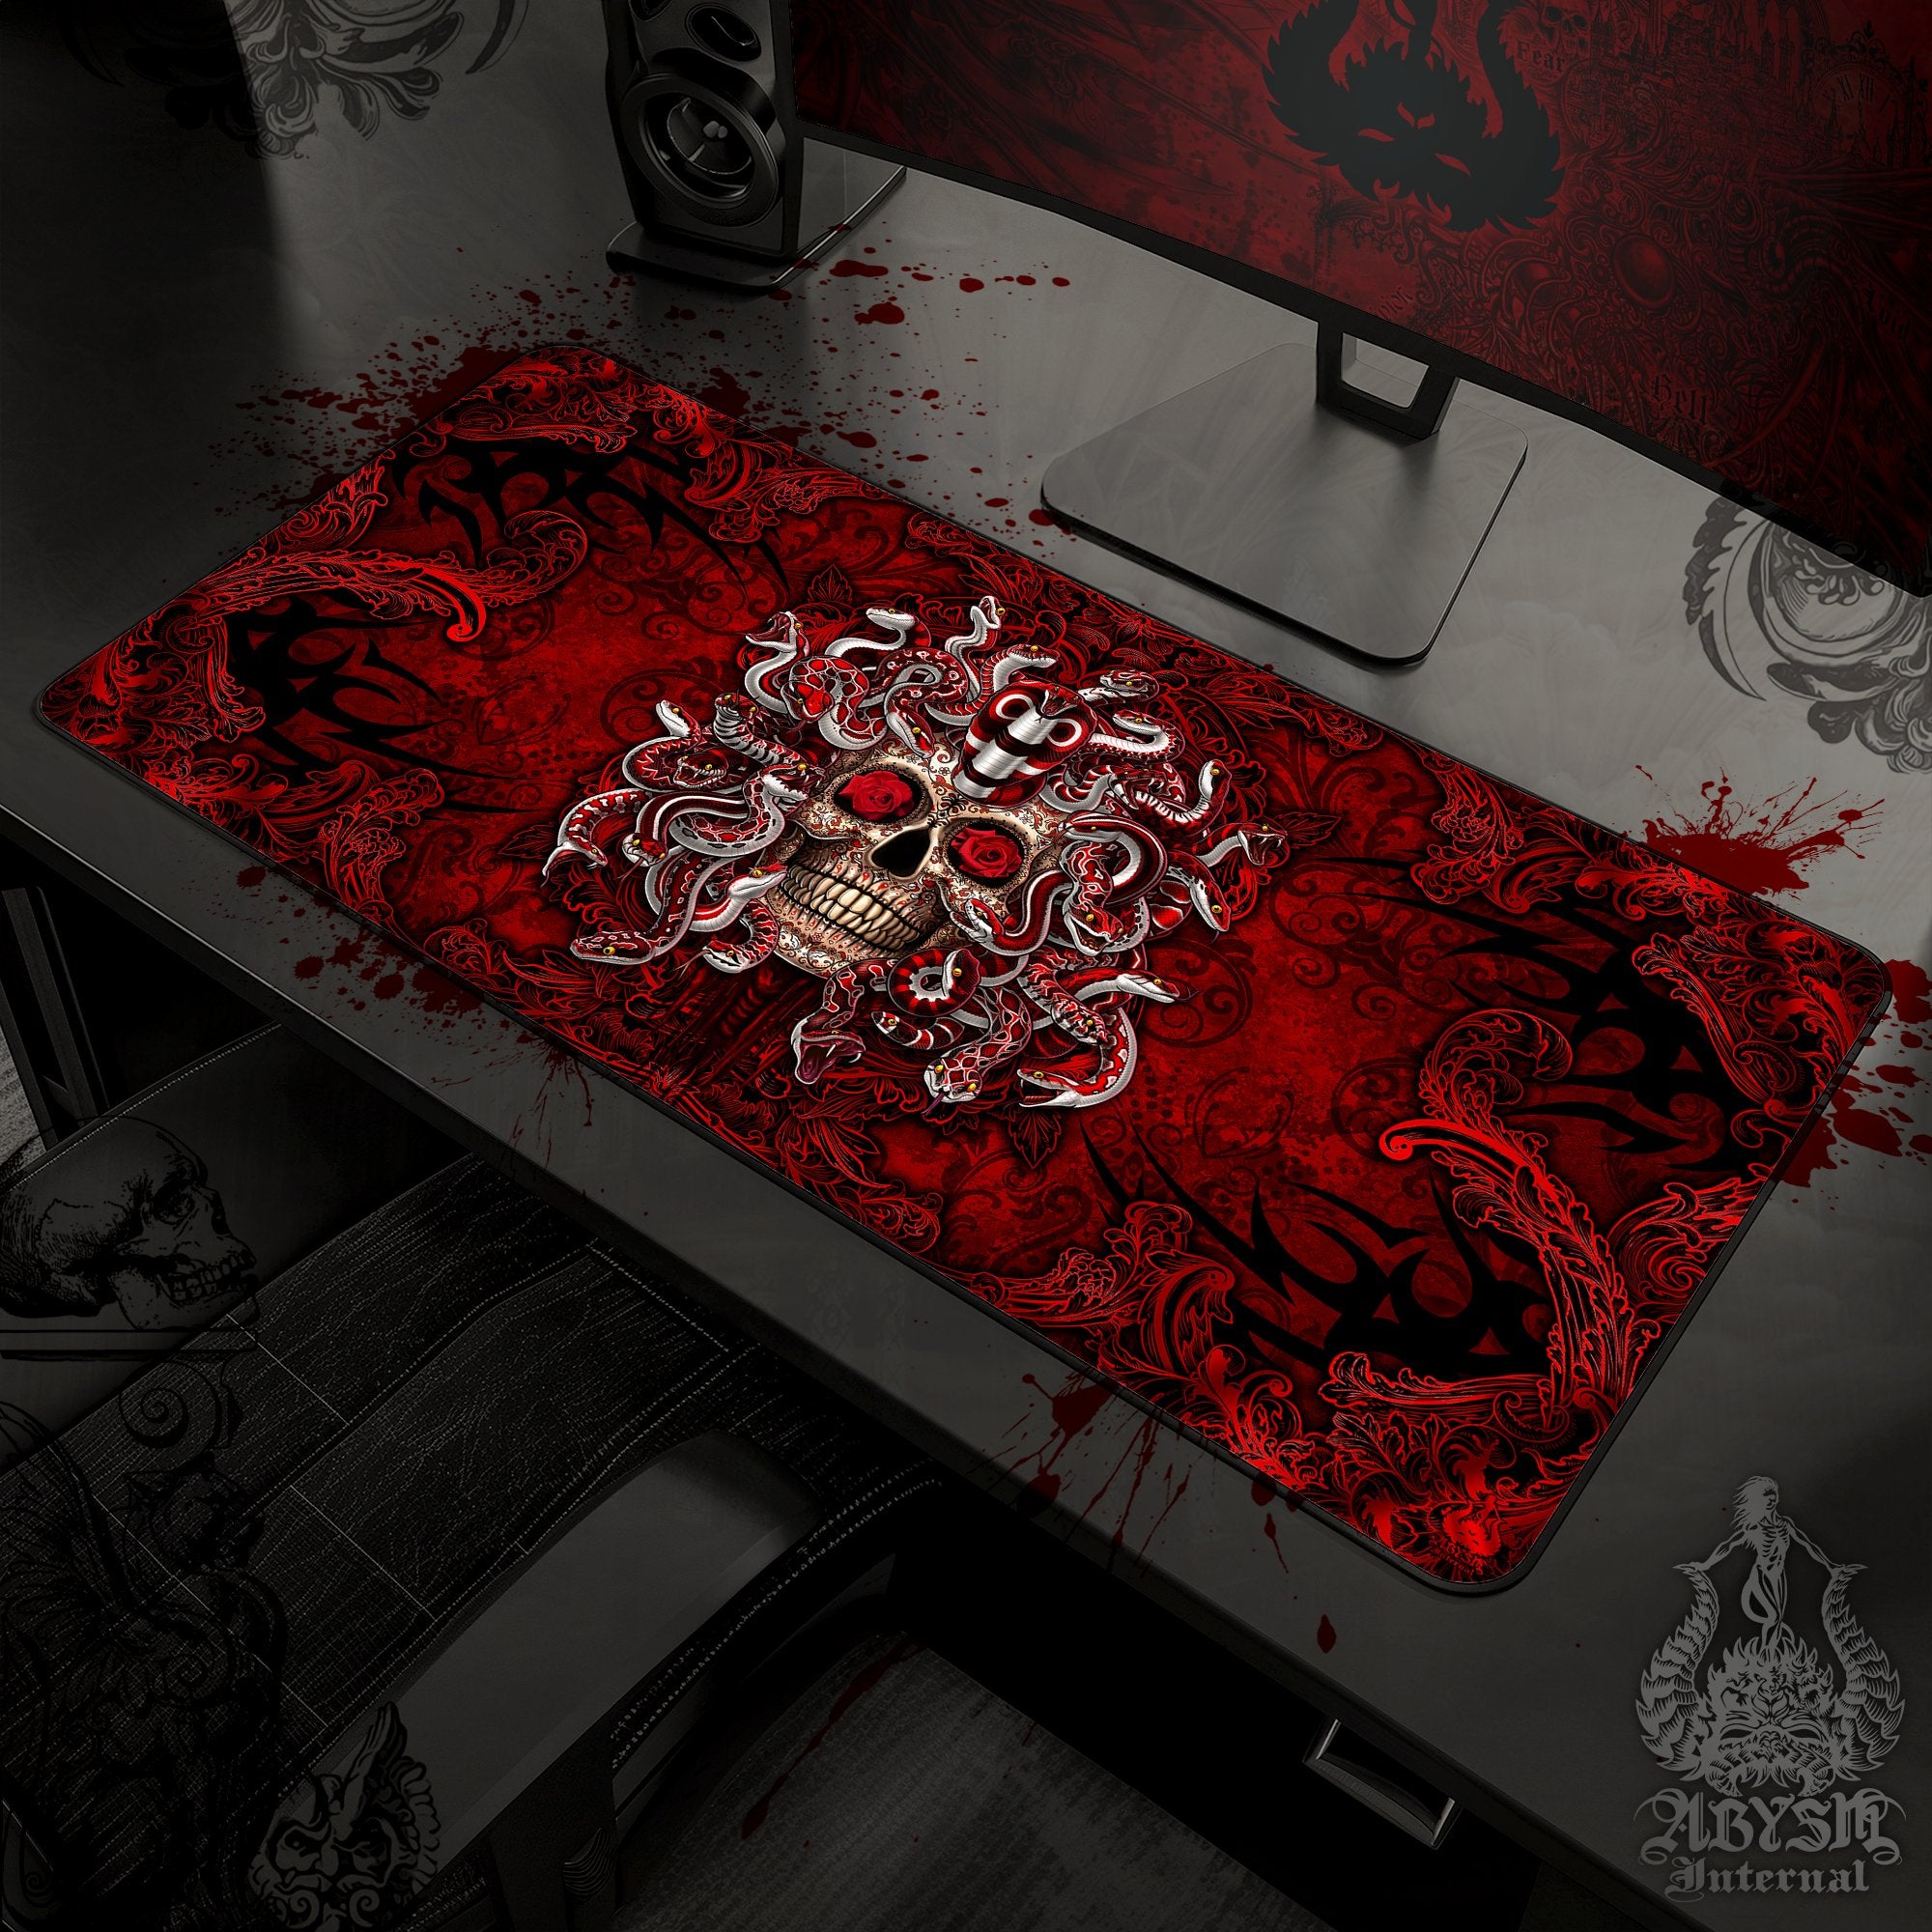 Sugar Skull Mouse Pad, Dia de los Muertos Gaming Desk Mat, Day of the Dead Workpad, Gothic Medusa Table Protector Cover, Art Print - Abysm Internal